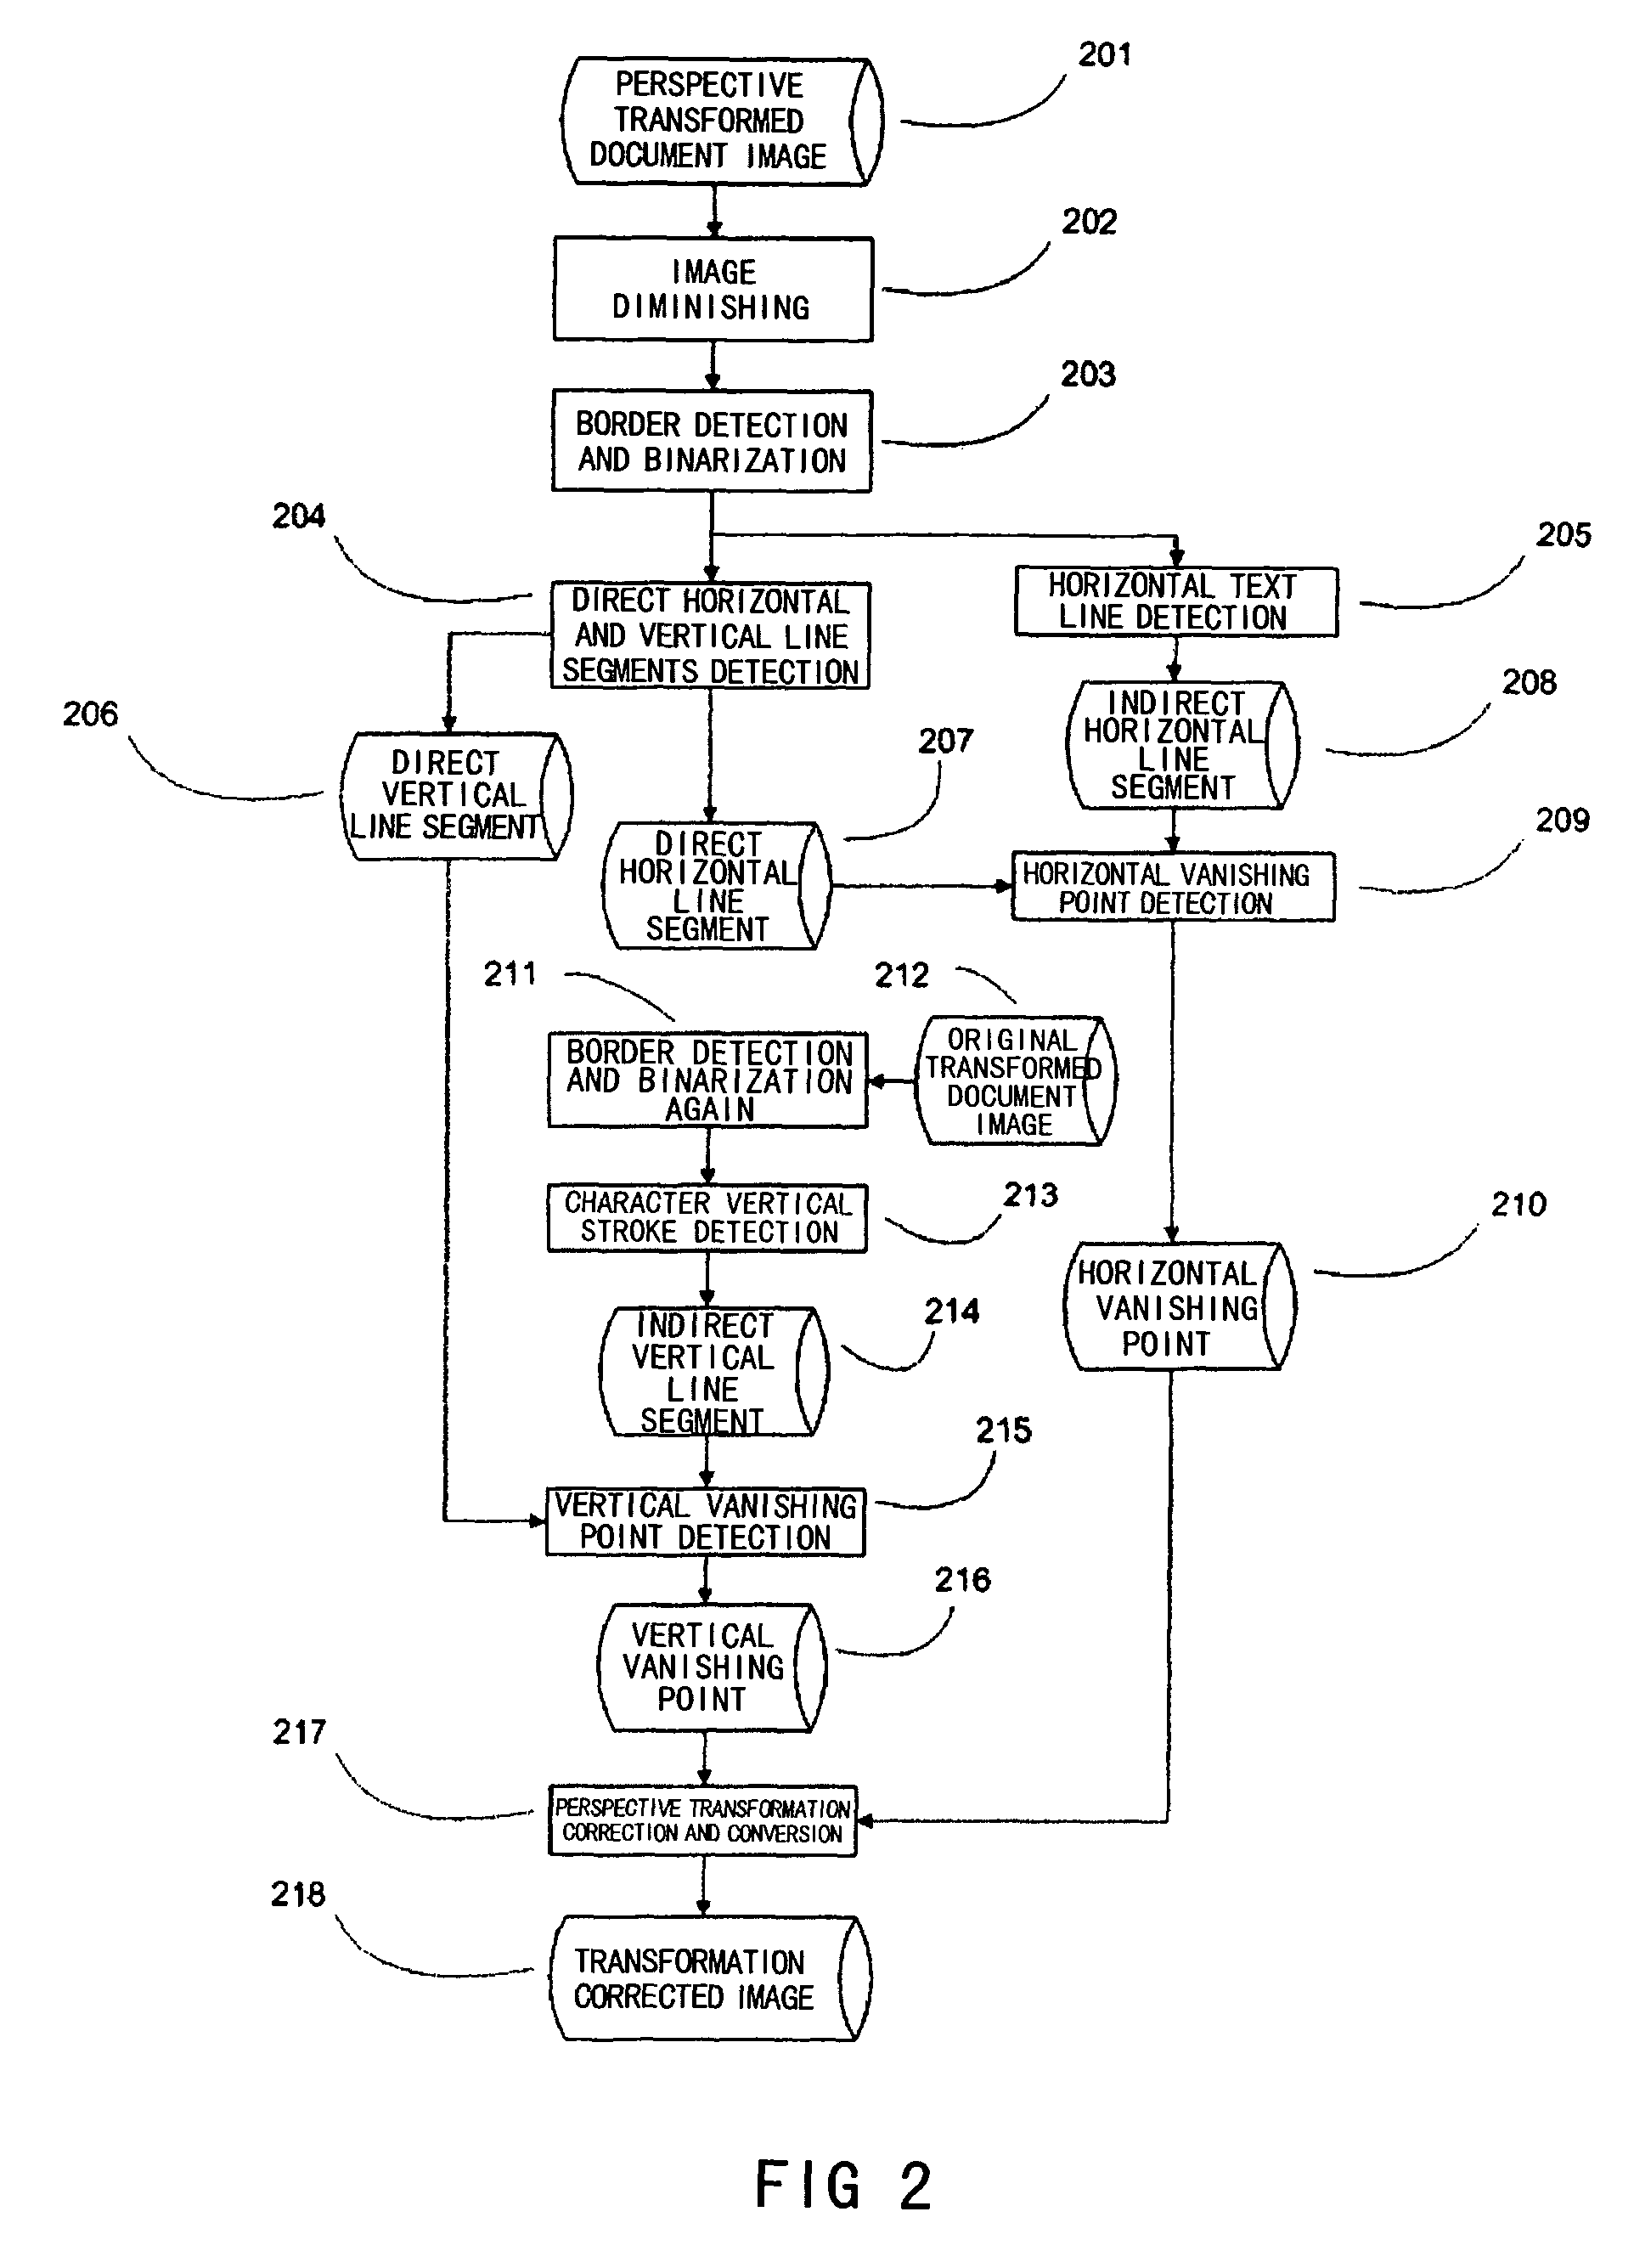 Correcting device and method for perspective transformed document images